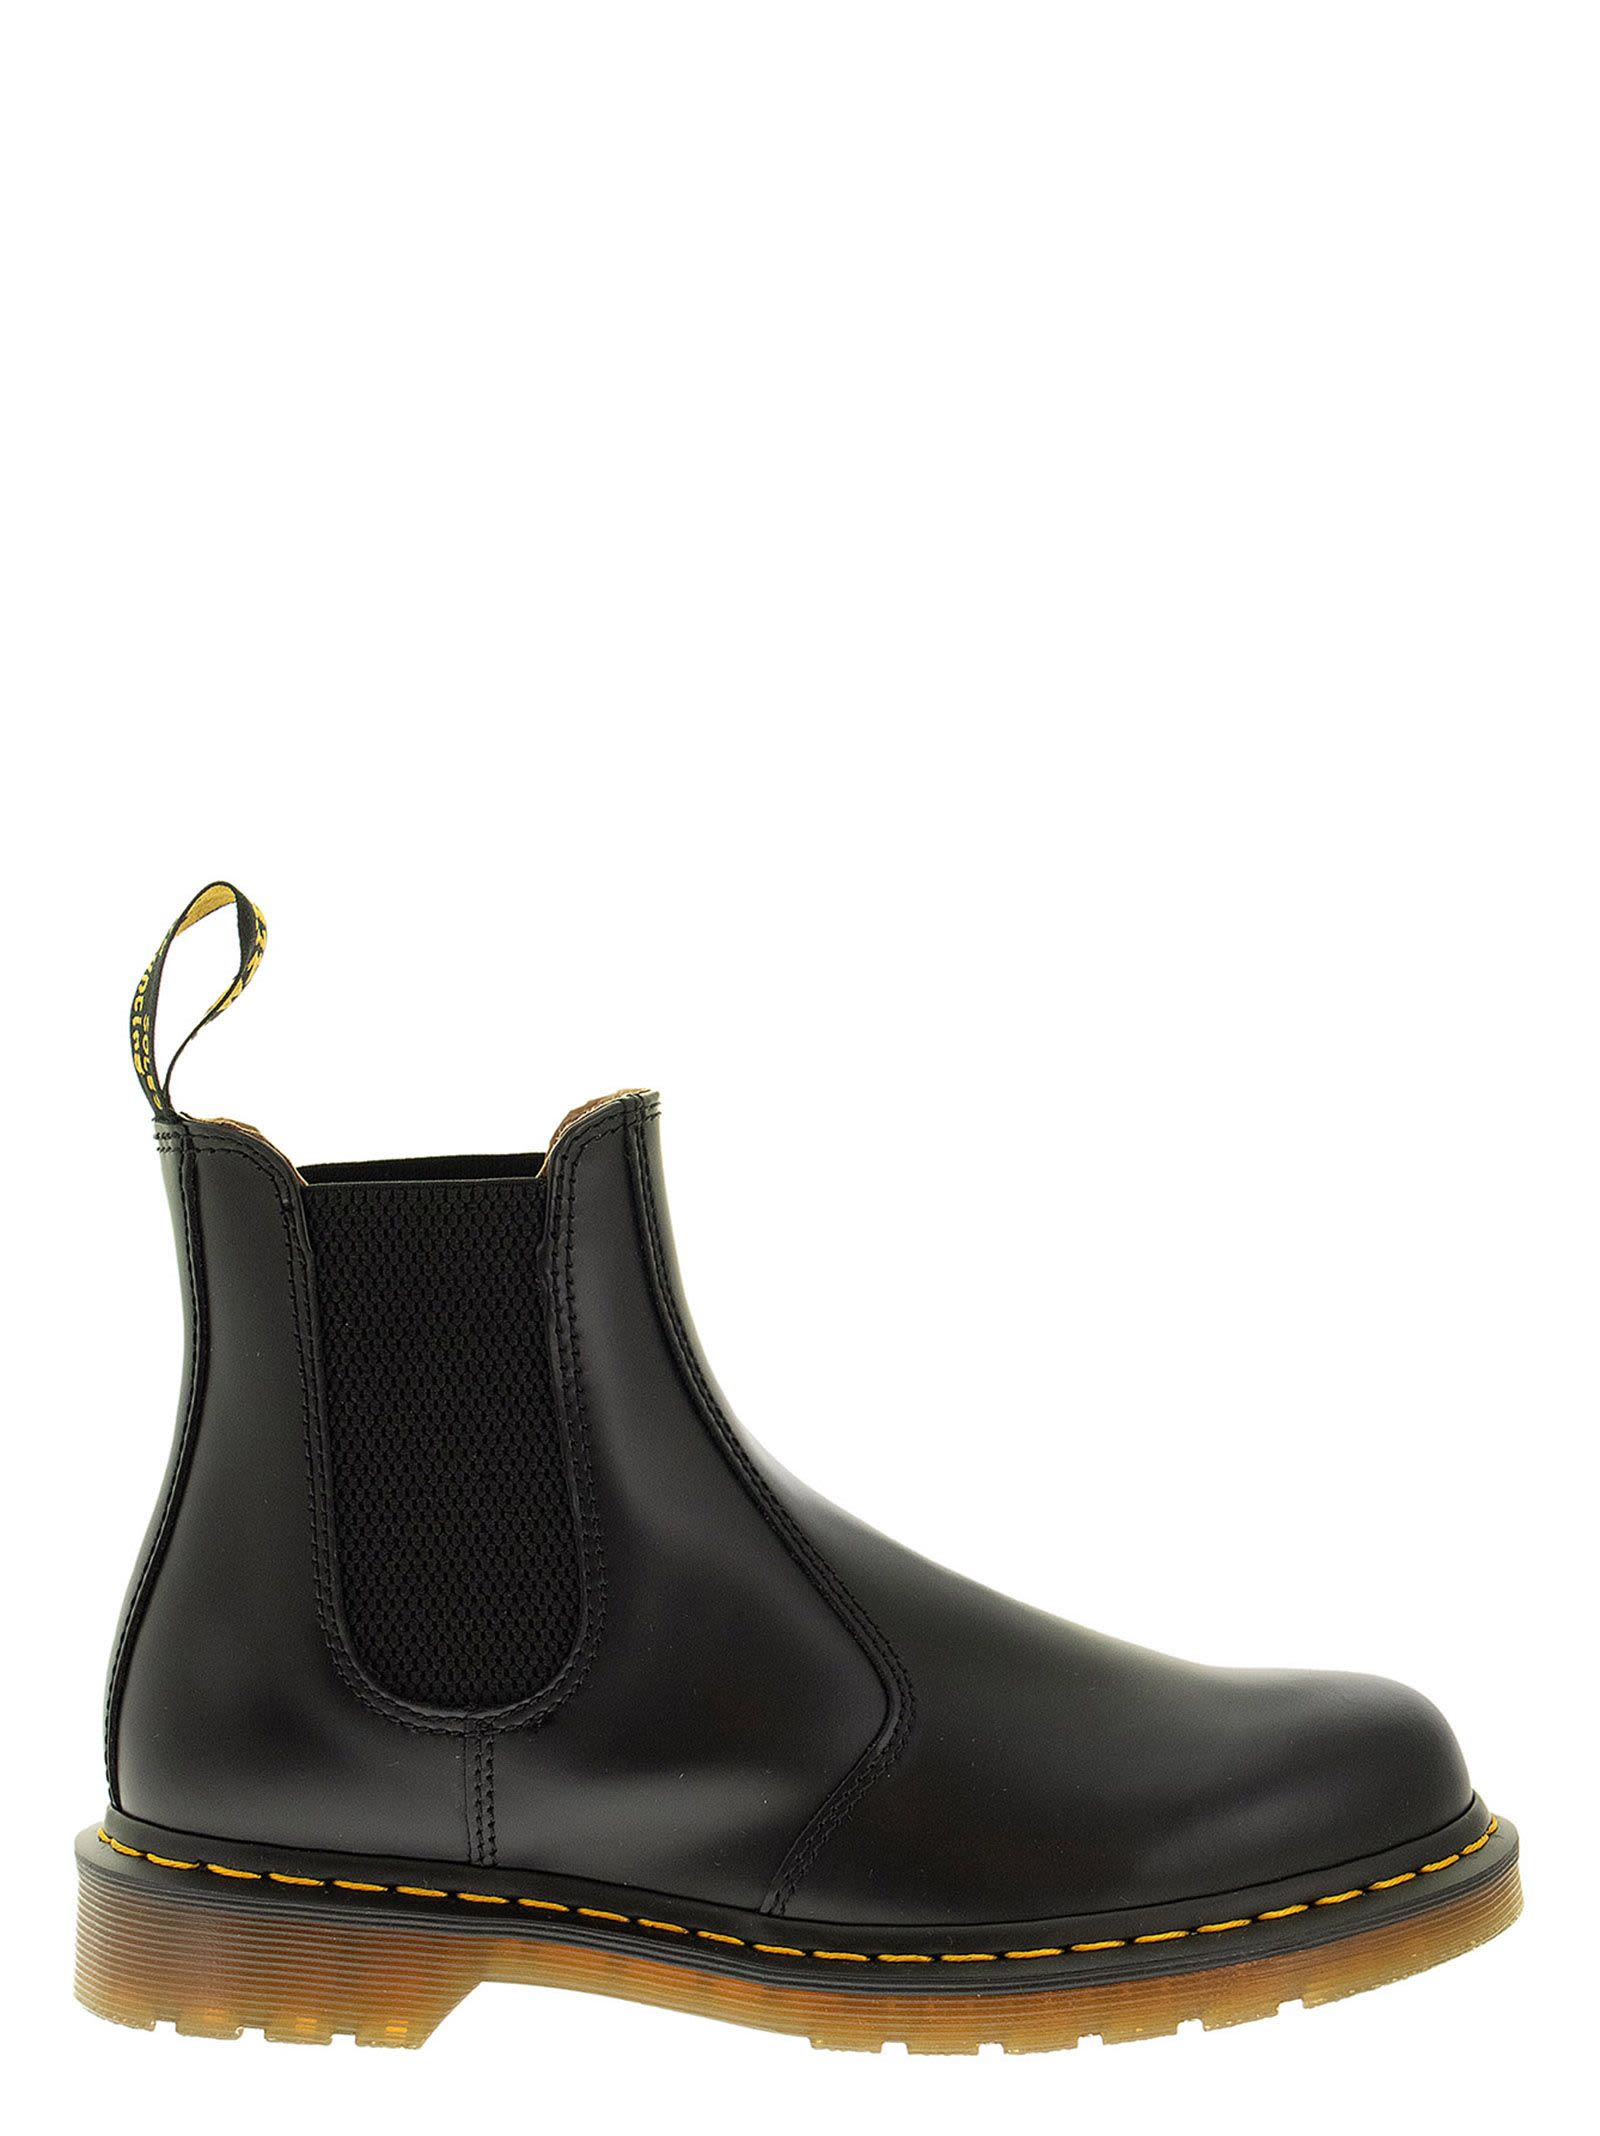 Dr. Martens 2976 Smooth Leather Chelsea Boots